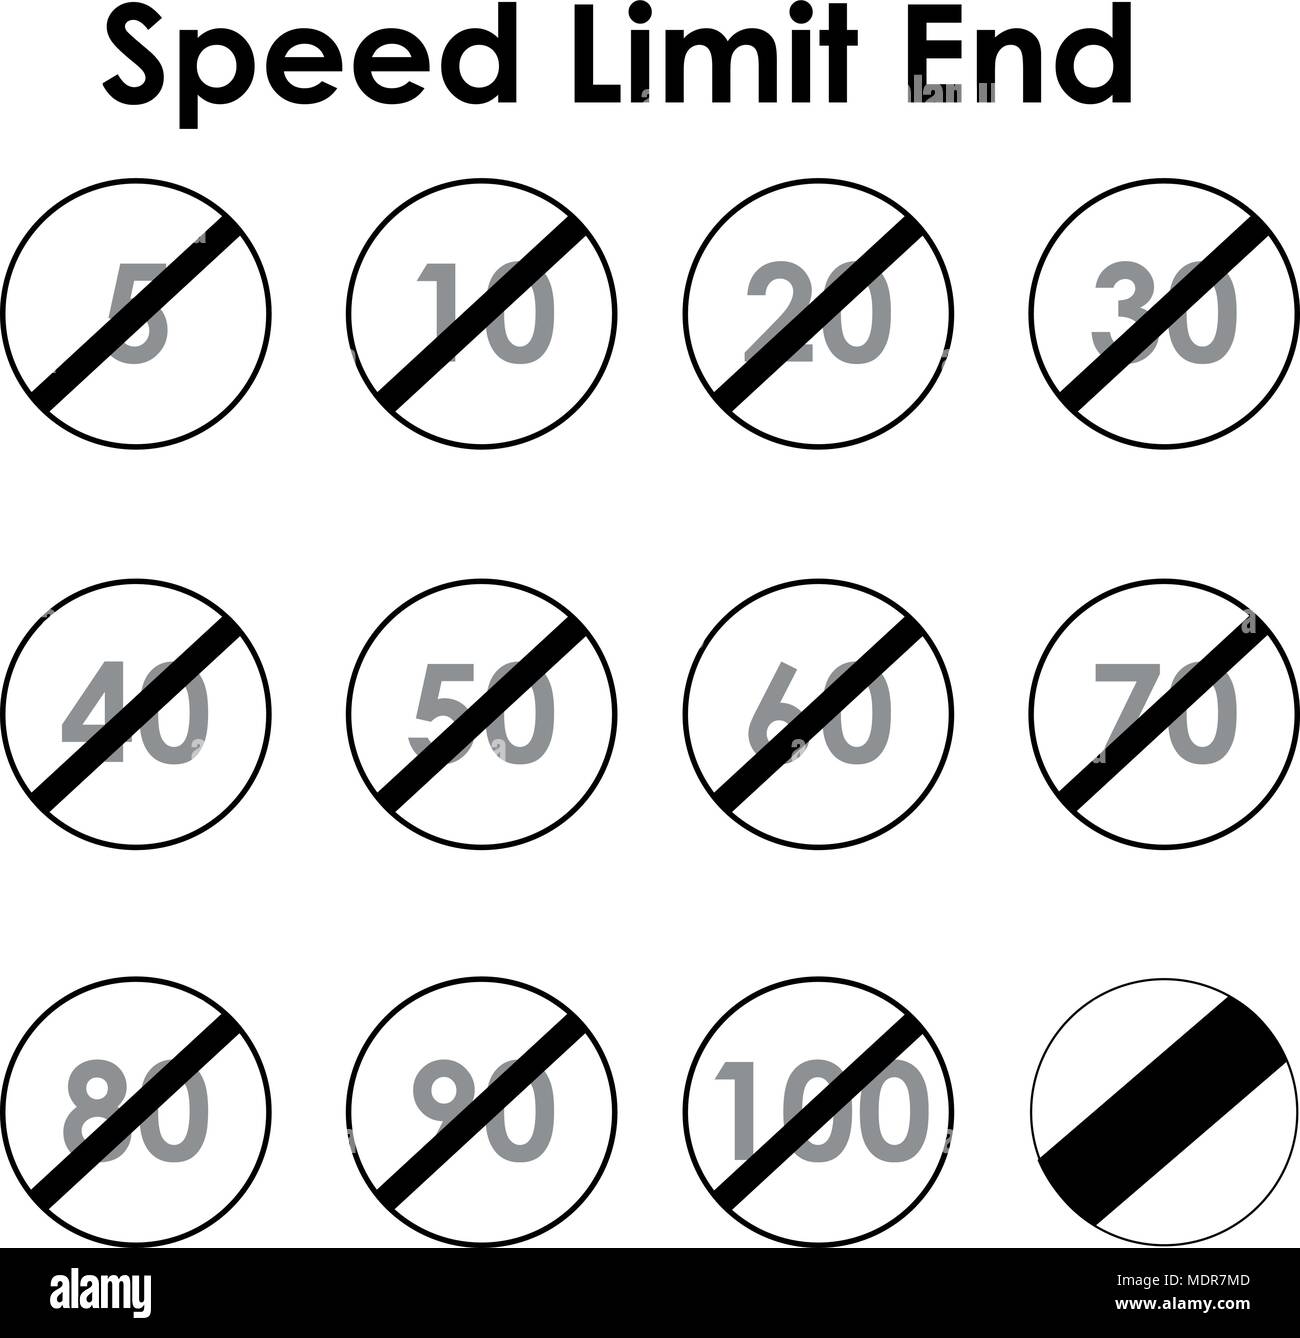 Speed limit end signs Stock Vector